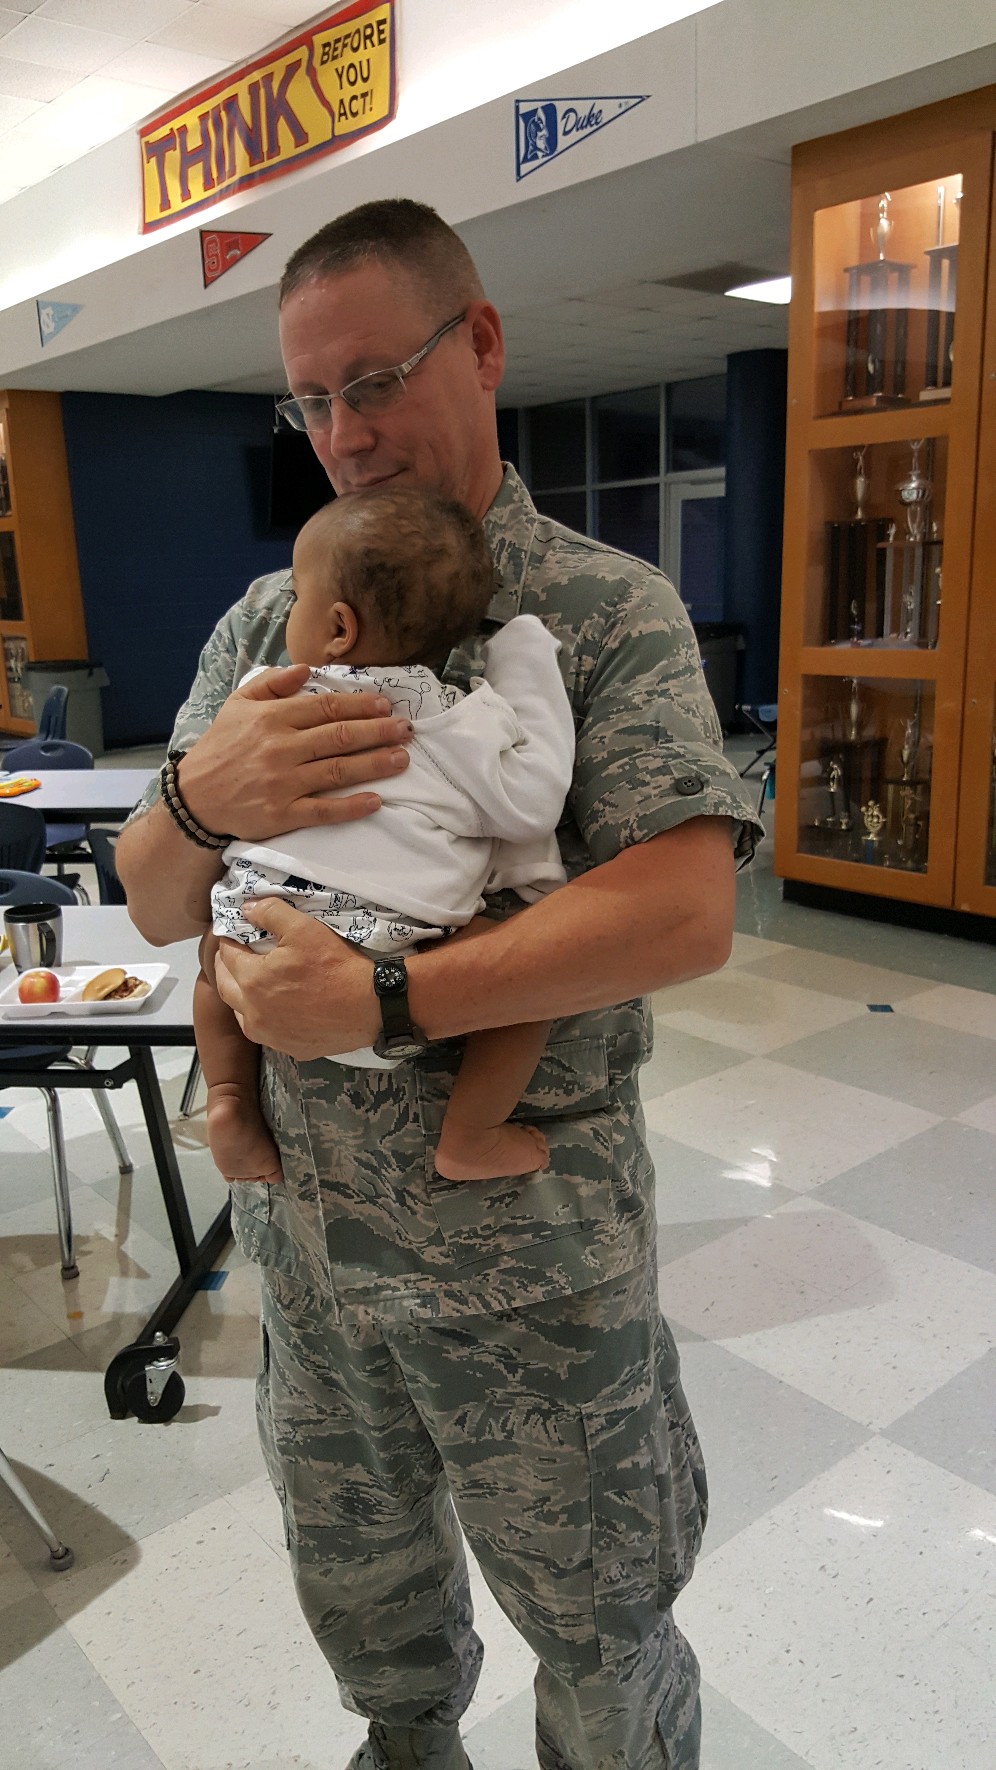 Richard Nold holds baby after Hurricane Florence hit